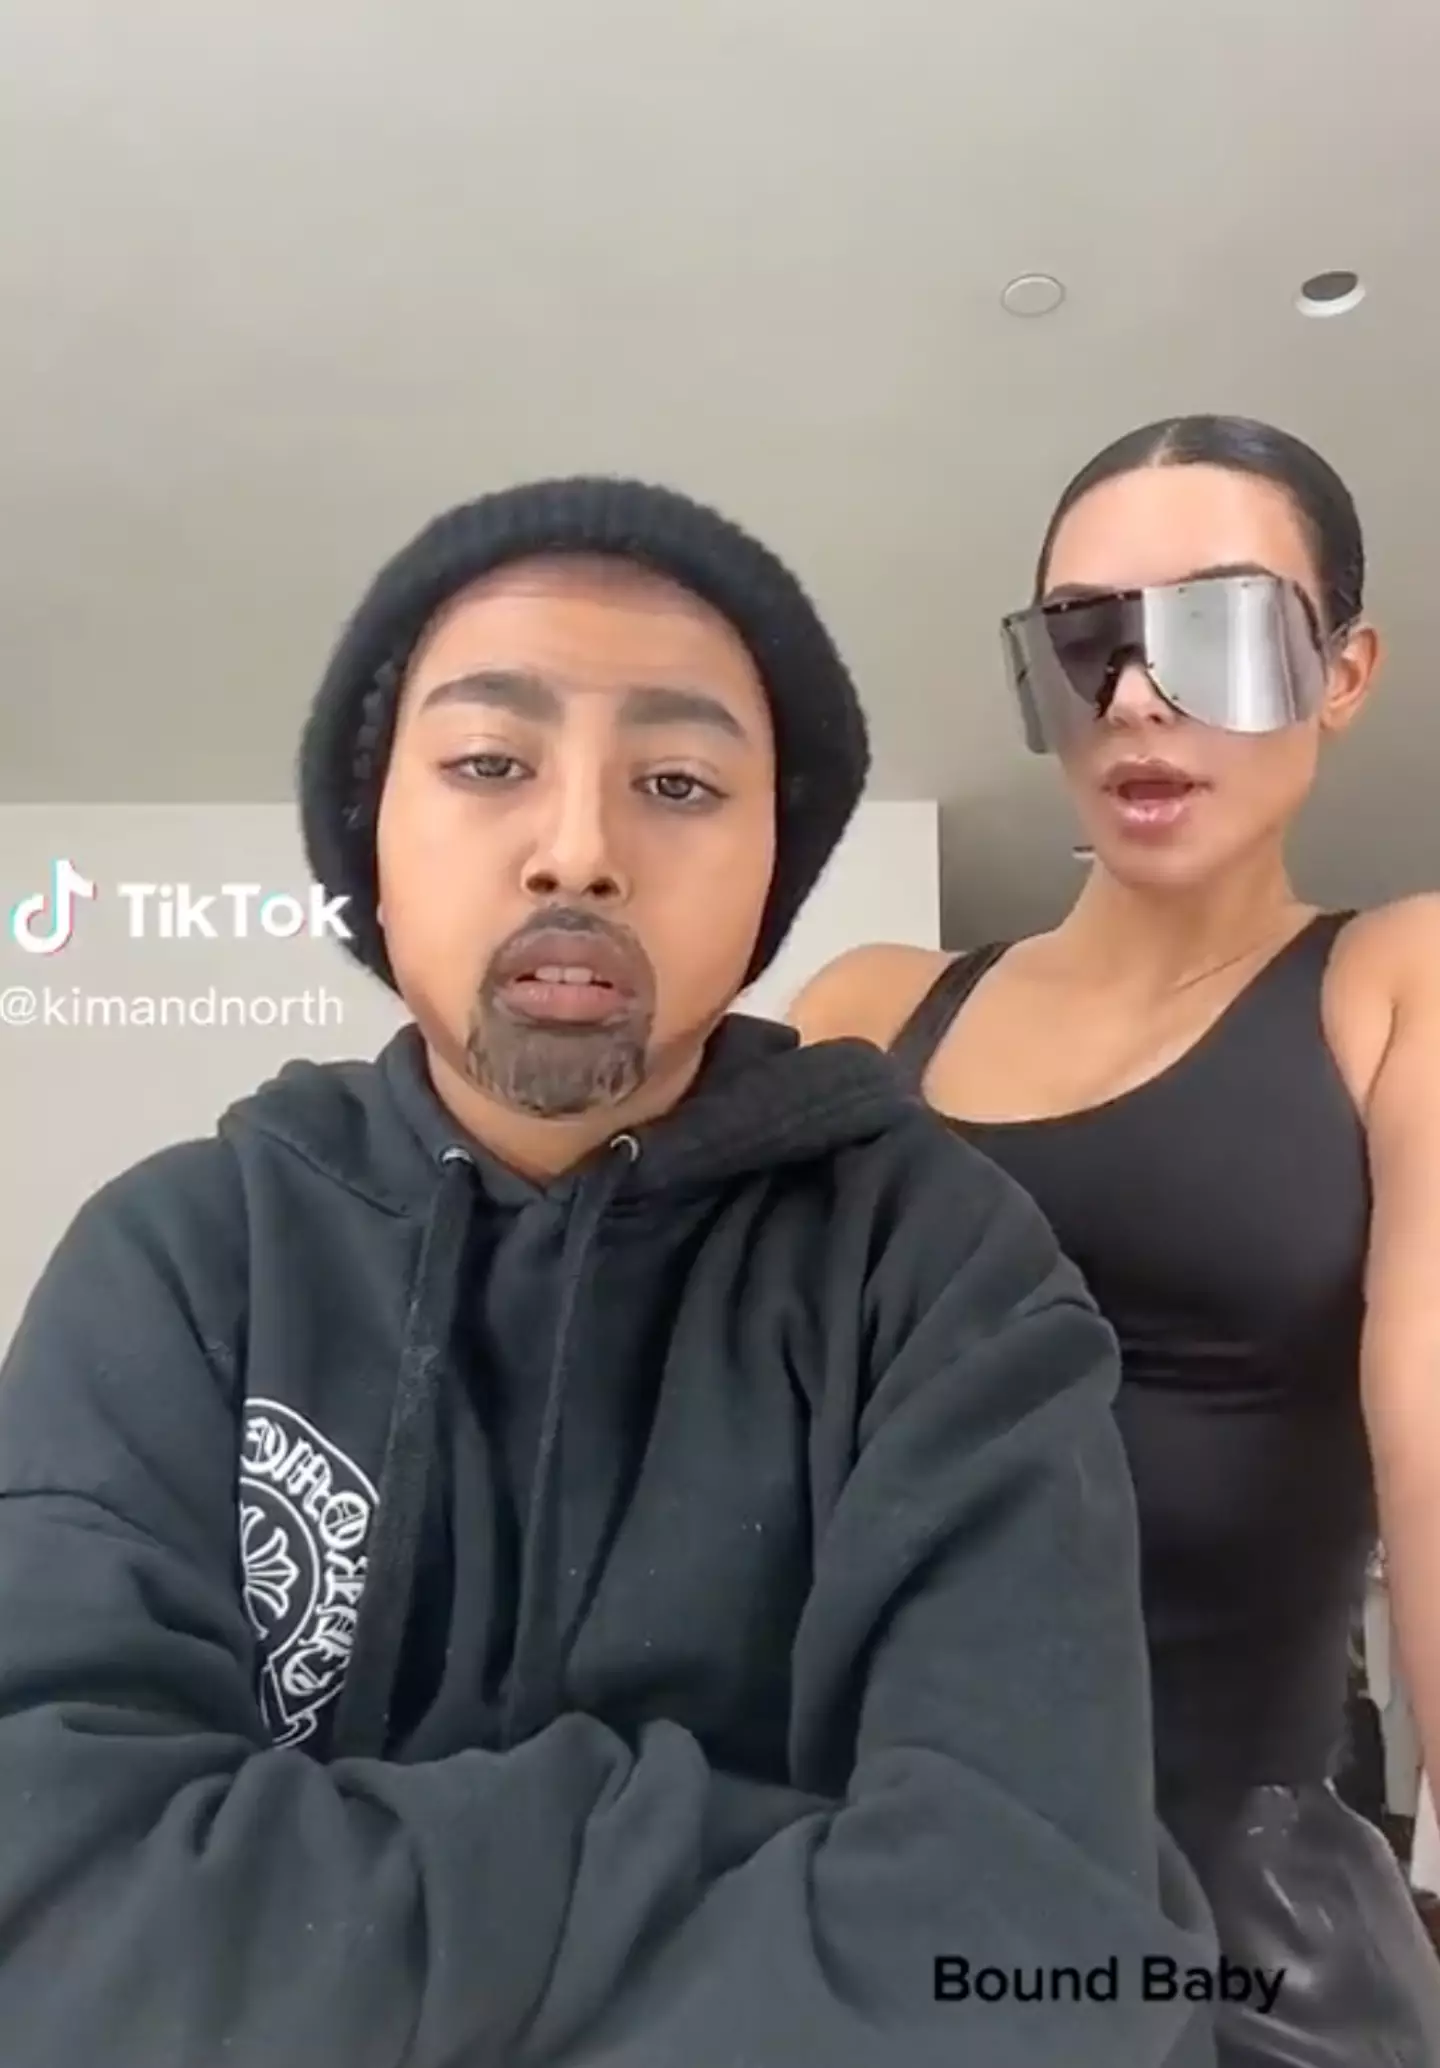 Kim and North dressed up for their latest TikTok.